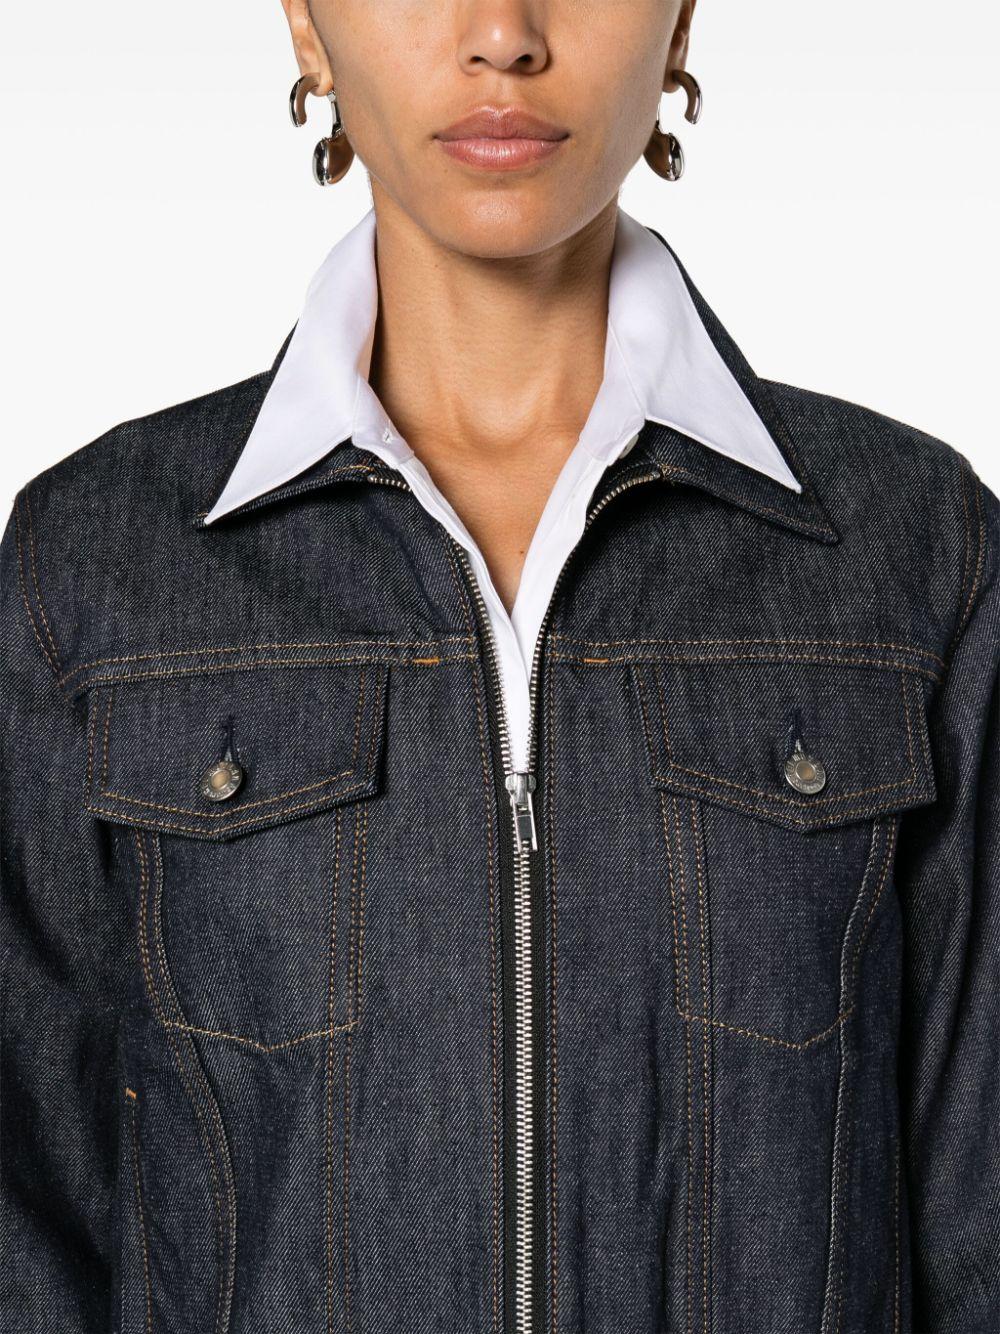 Helmut Lang exaggerated-cuffs Denim Jacket in Black | Lyst